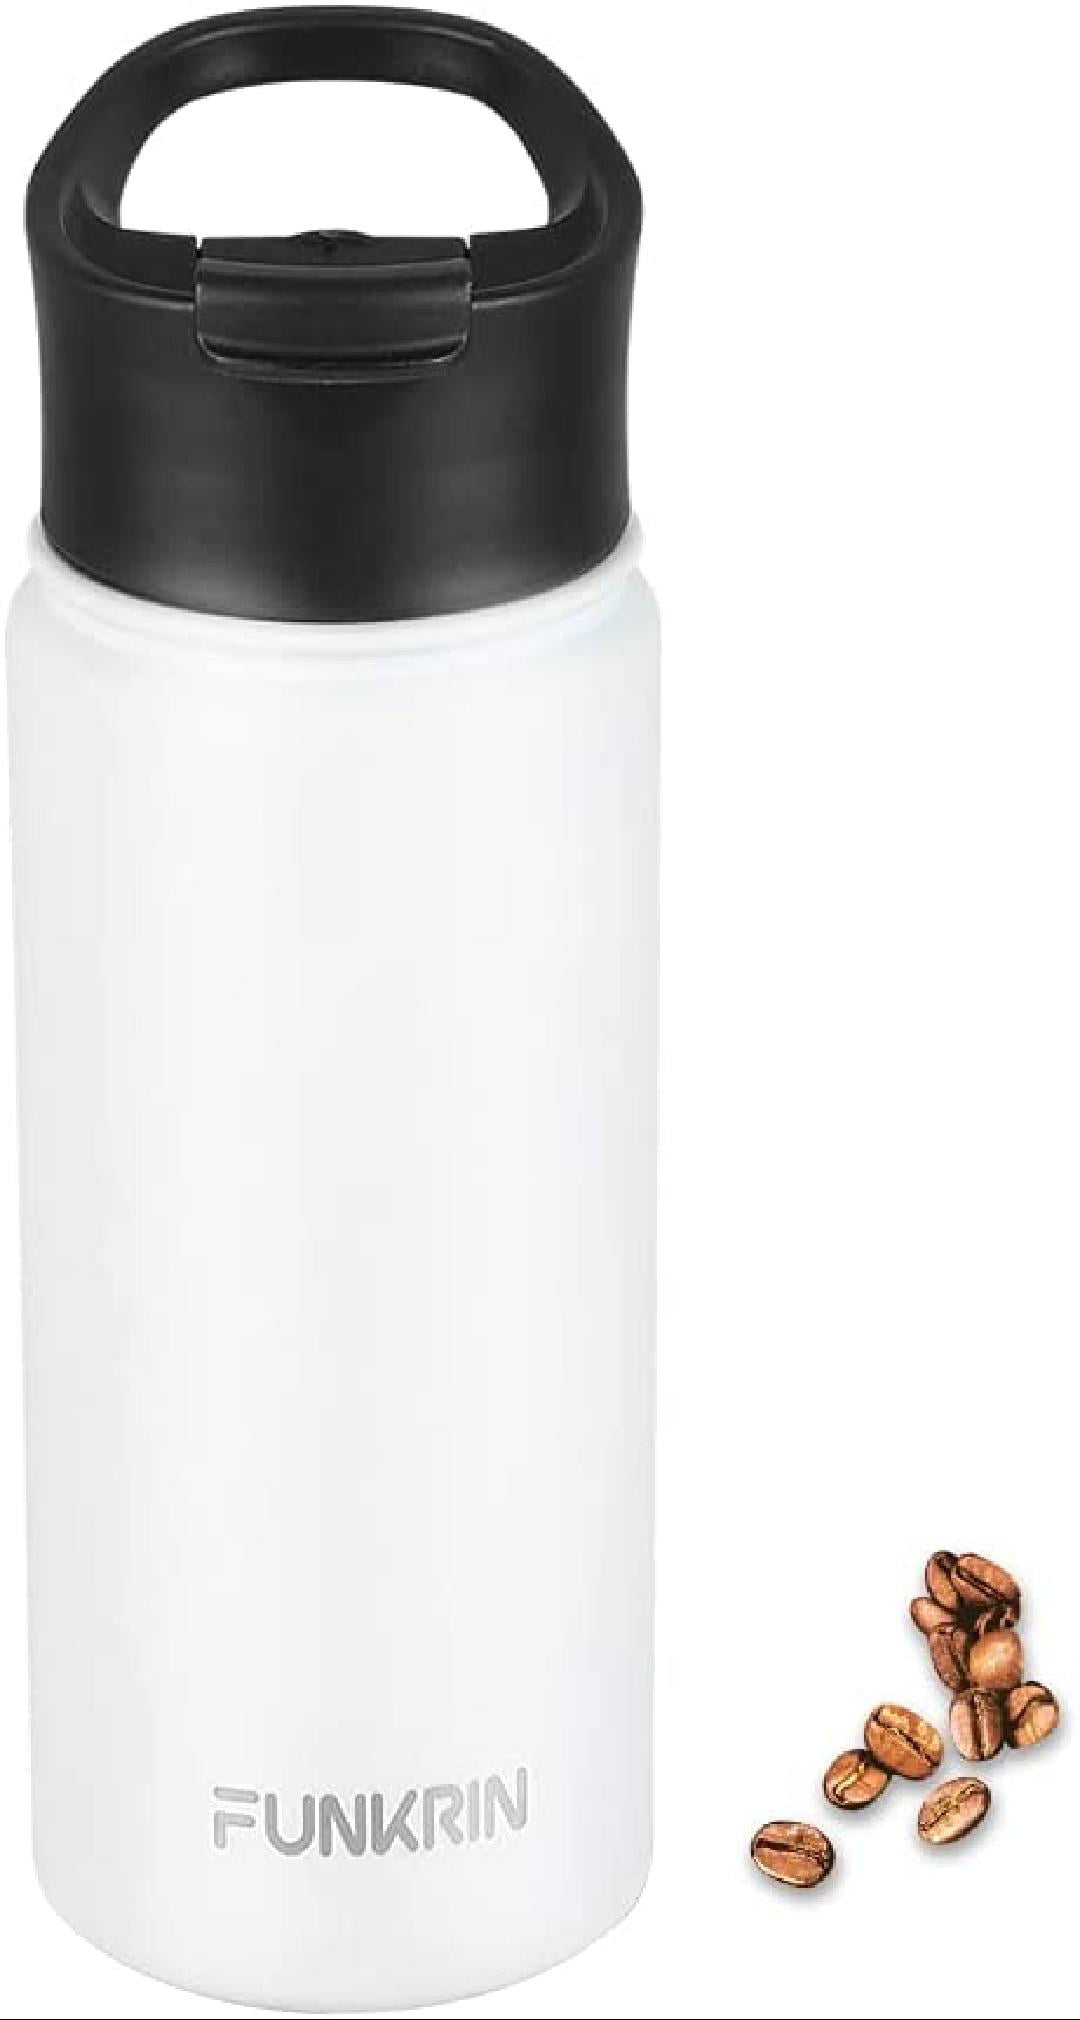 EPOGG 12oz Ceramic Travel Mug, Insulated Coffee Cup with Leakproof